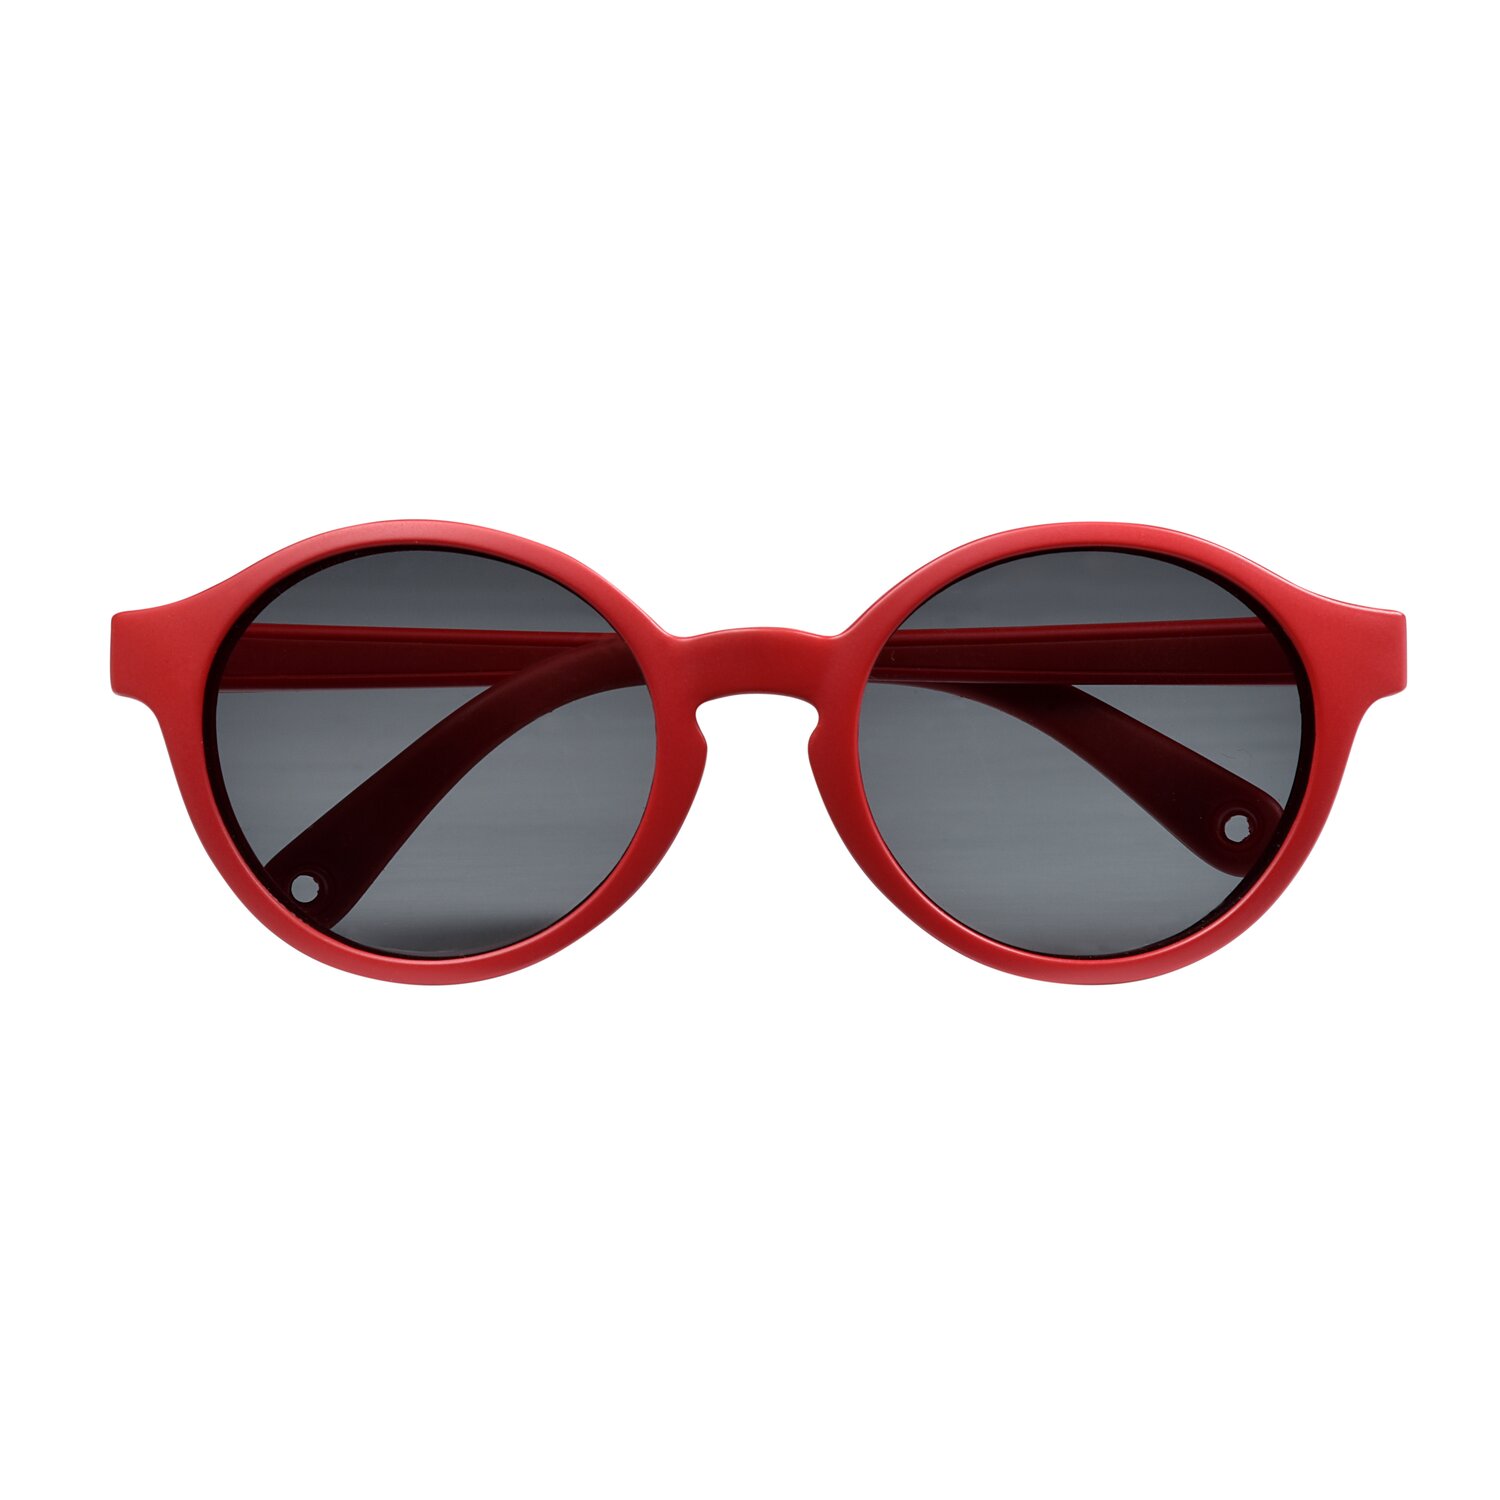 Lunettes 2-4 ans merry - poppy red Béaba